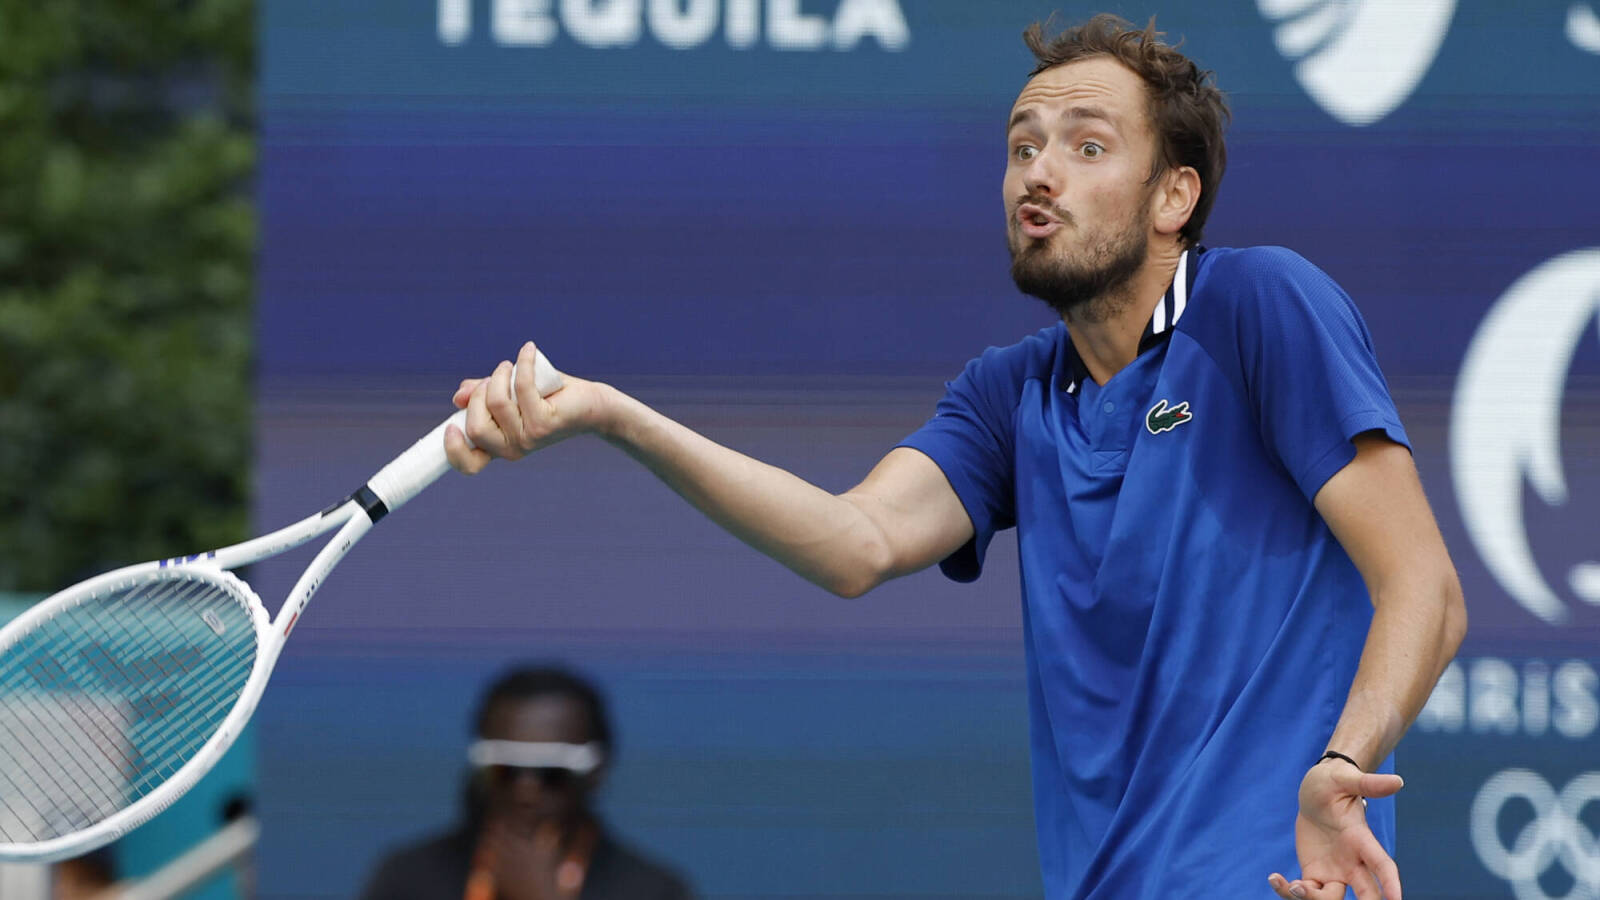 'I’m so so scared,' Daniil Medvedev retires from Madrid Open due to injury as Jiri Lehecka advances to his first-ever major semifinal